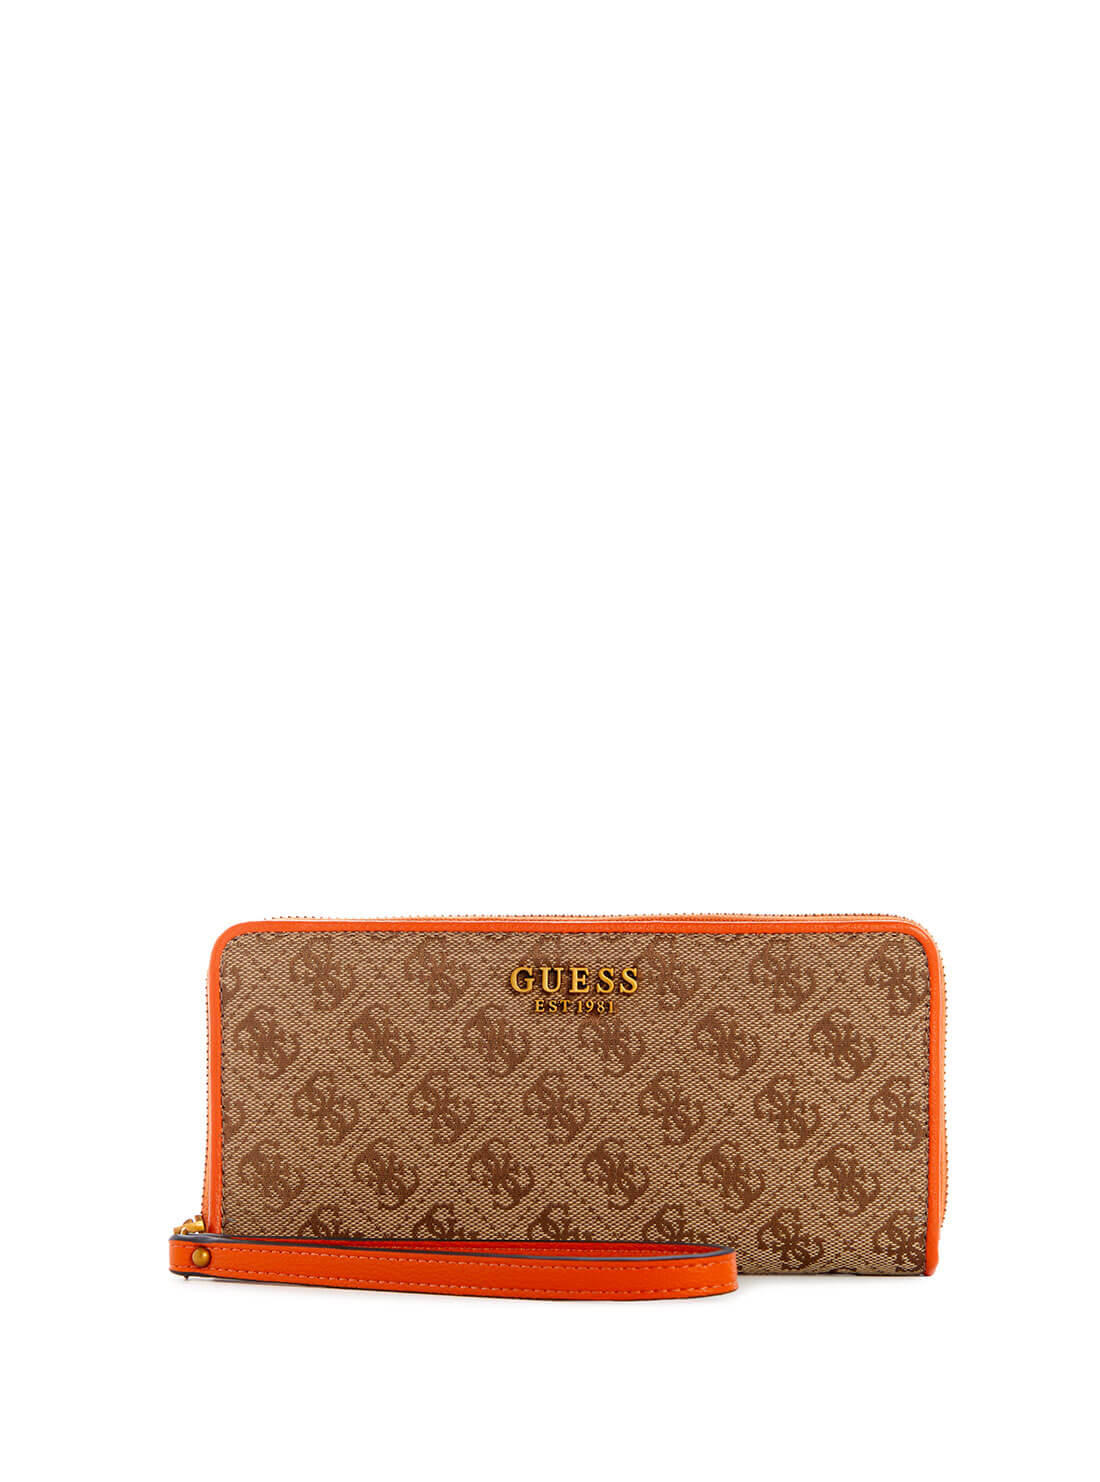 GUESS Womens  Brown Orange Aviana Large Wallet JB841446 Front View